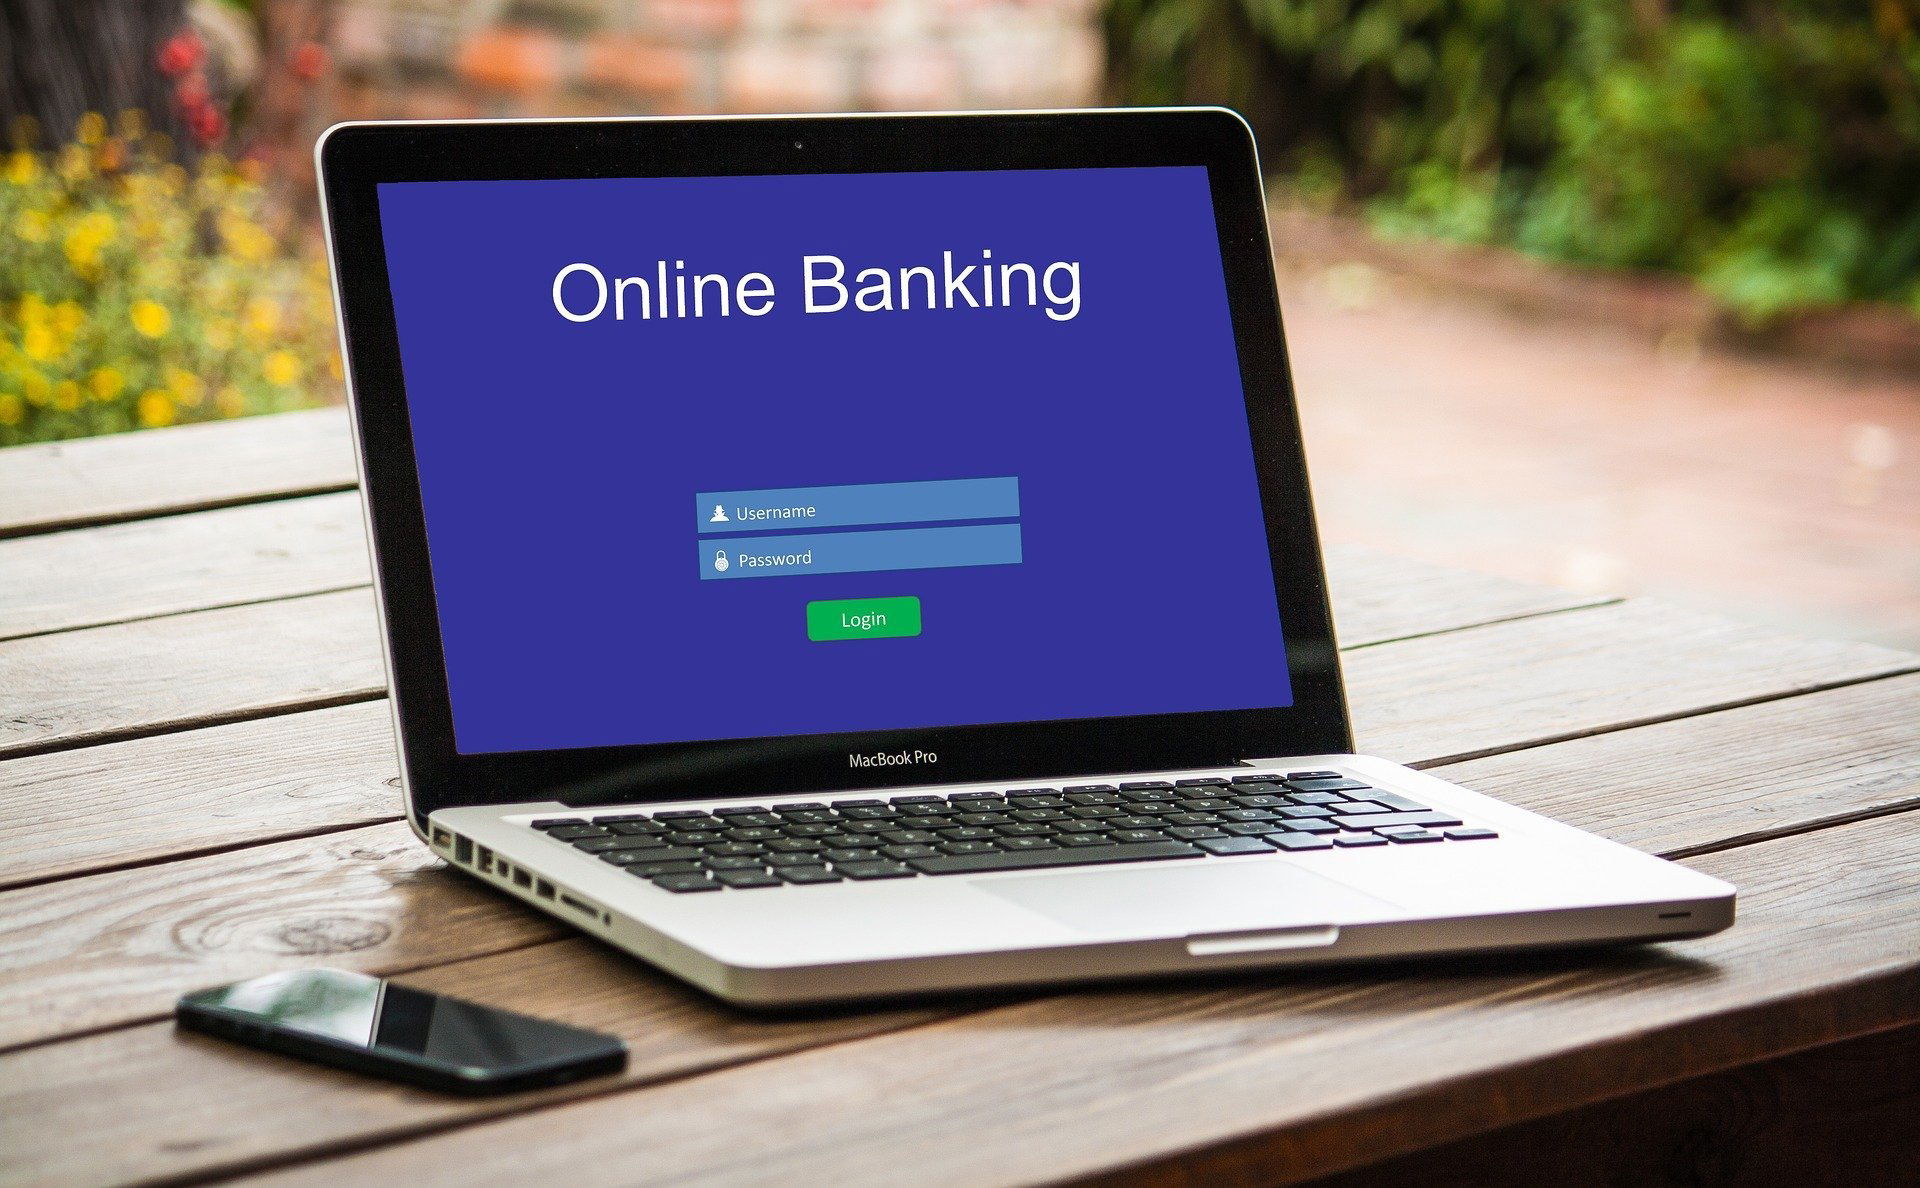 The best 5 online banks in the world